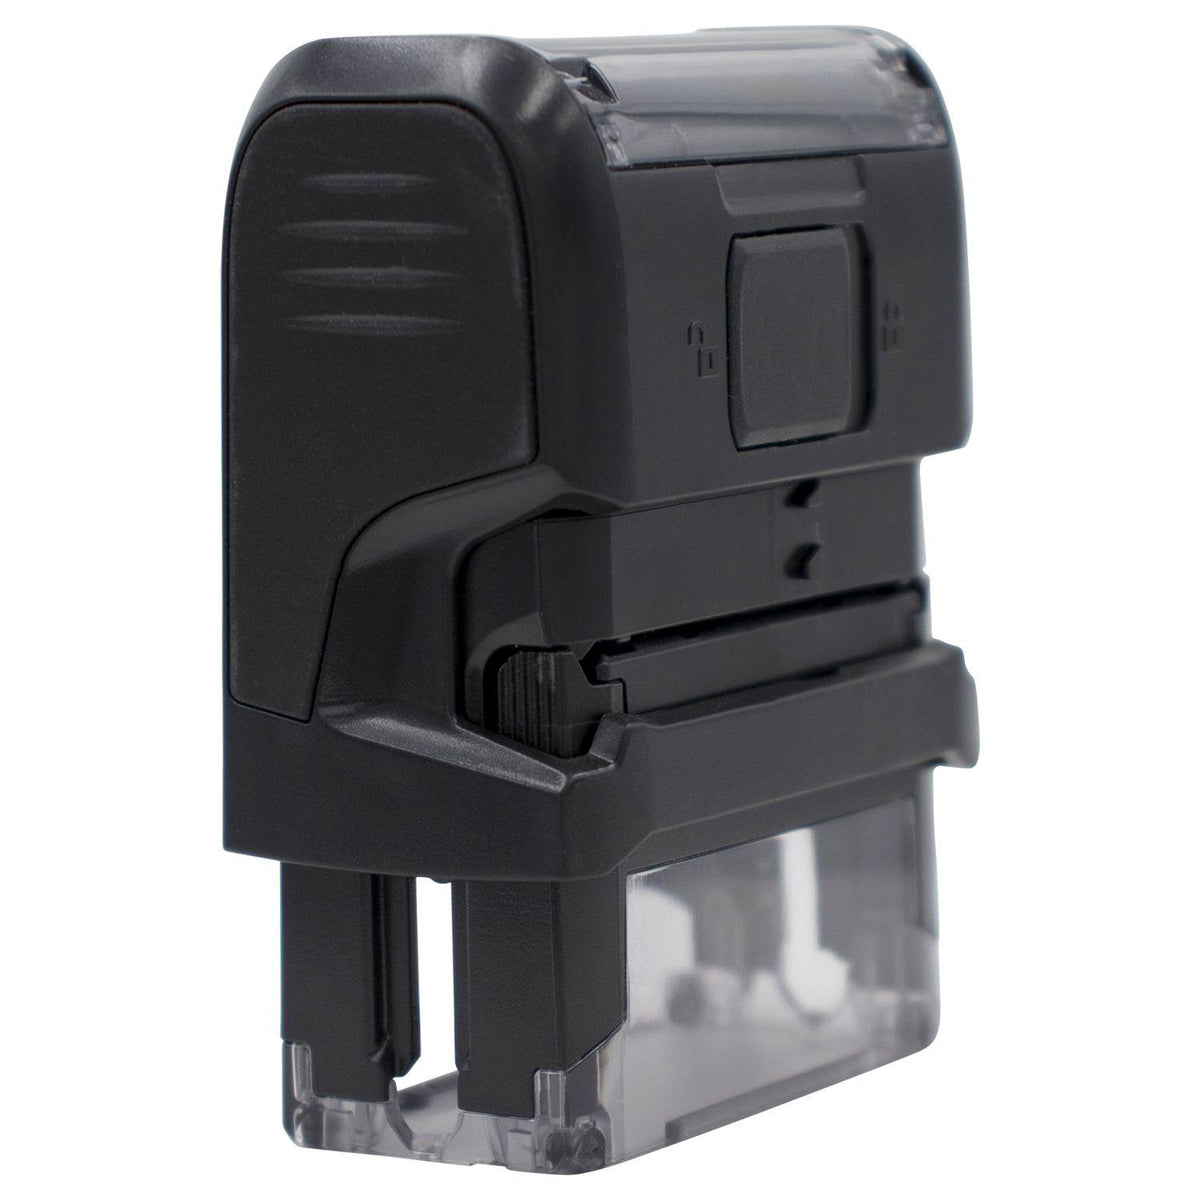 Large Self Inking Approved For Payment Stamp Back View